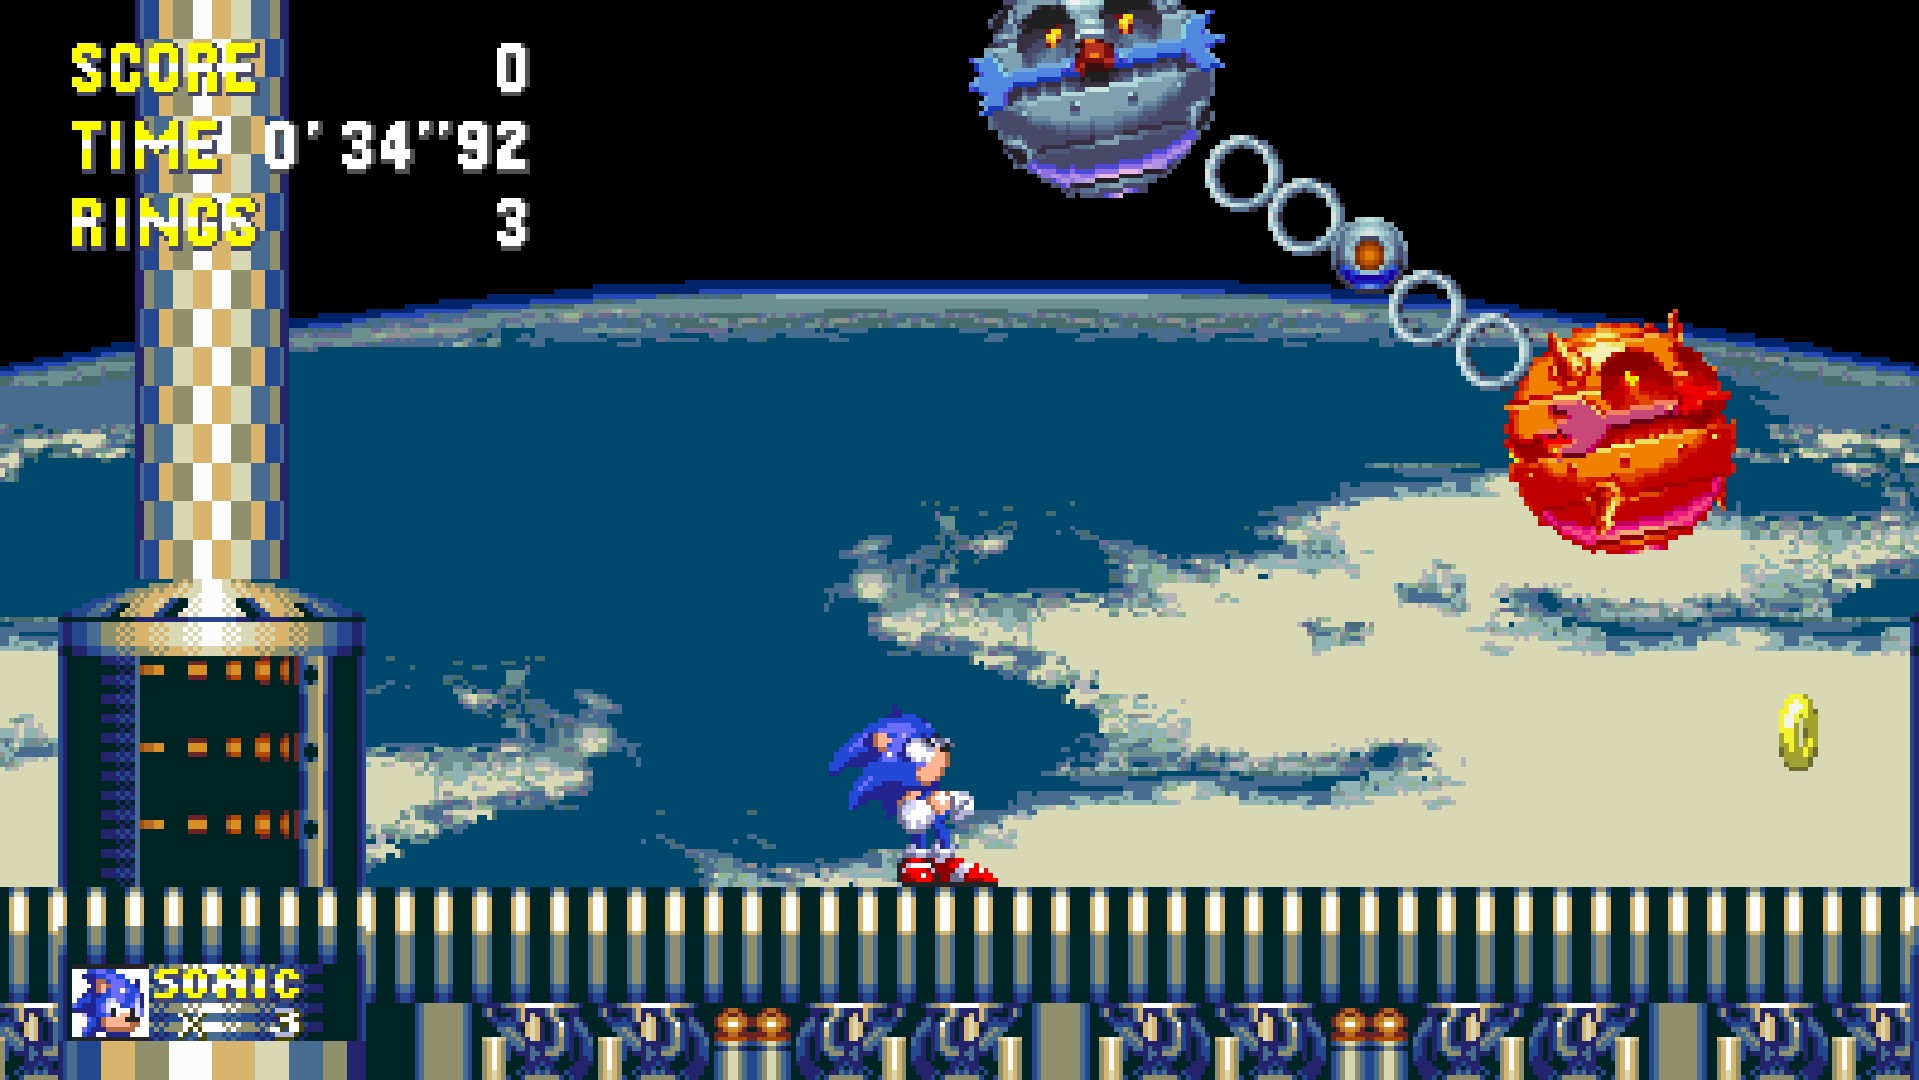 Sonic boss over Eggman ~ Sonic 3 A.I.R. mods ~ Gameplay 